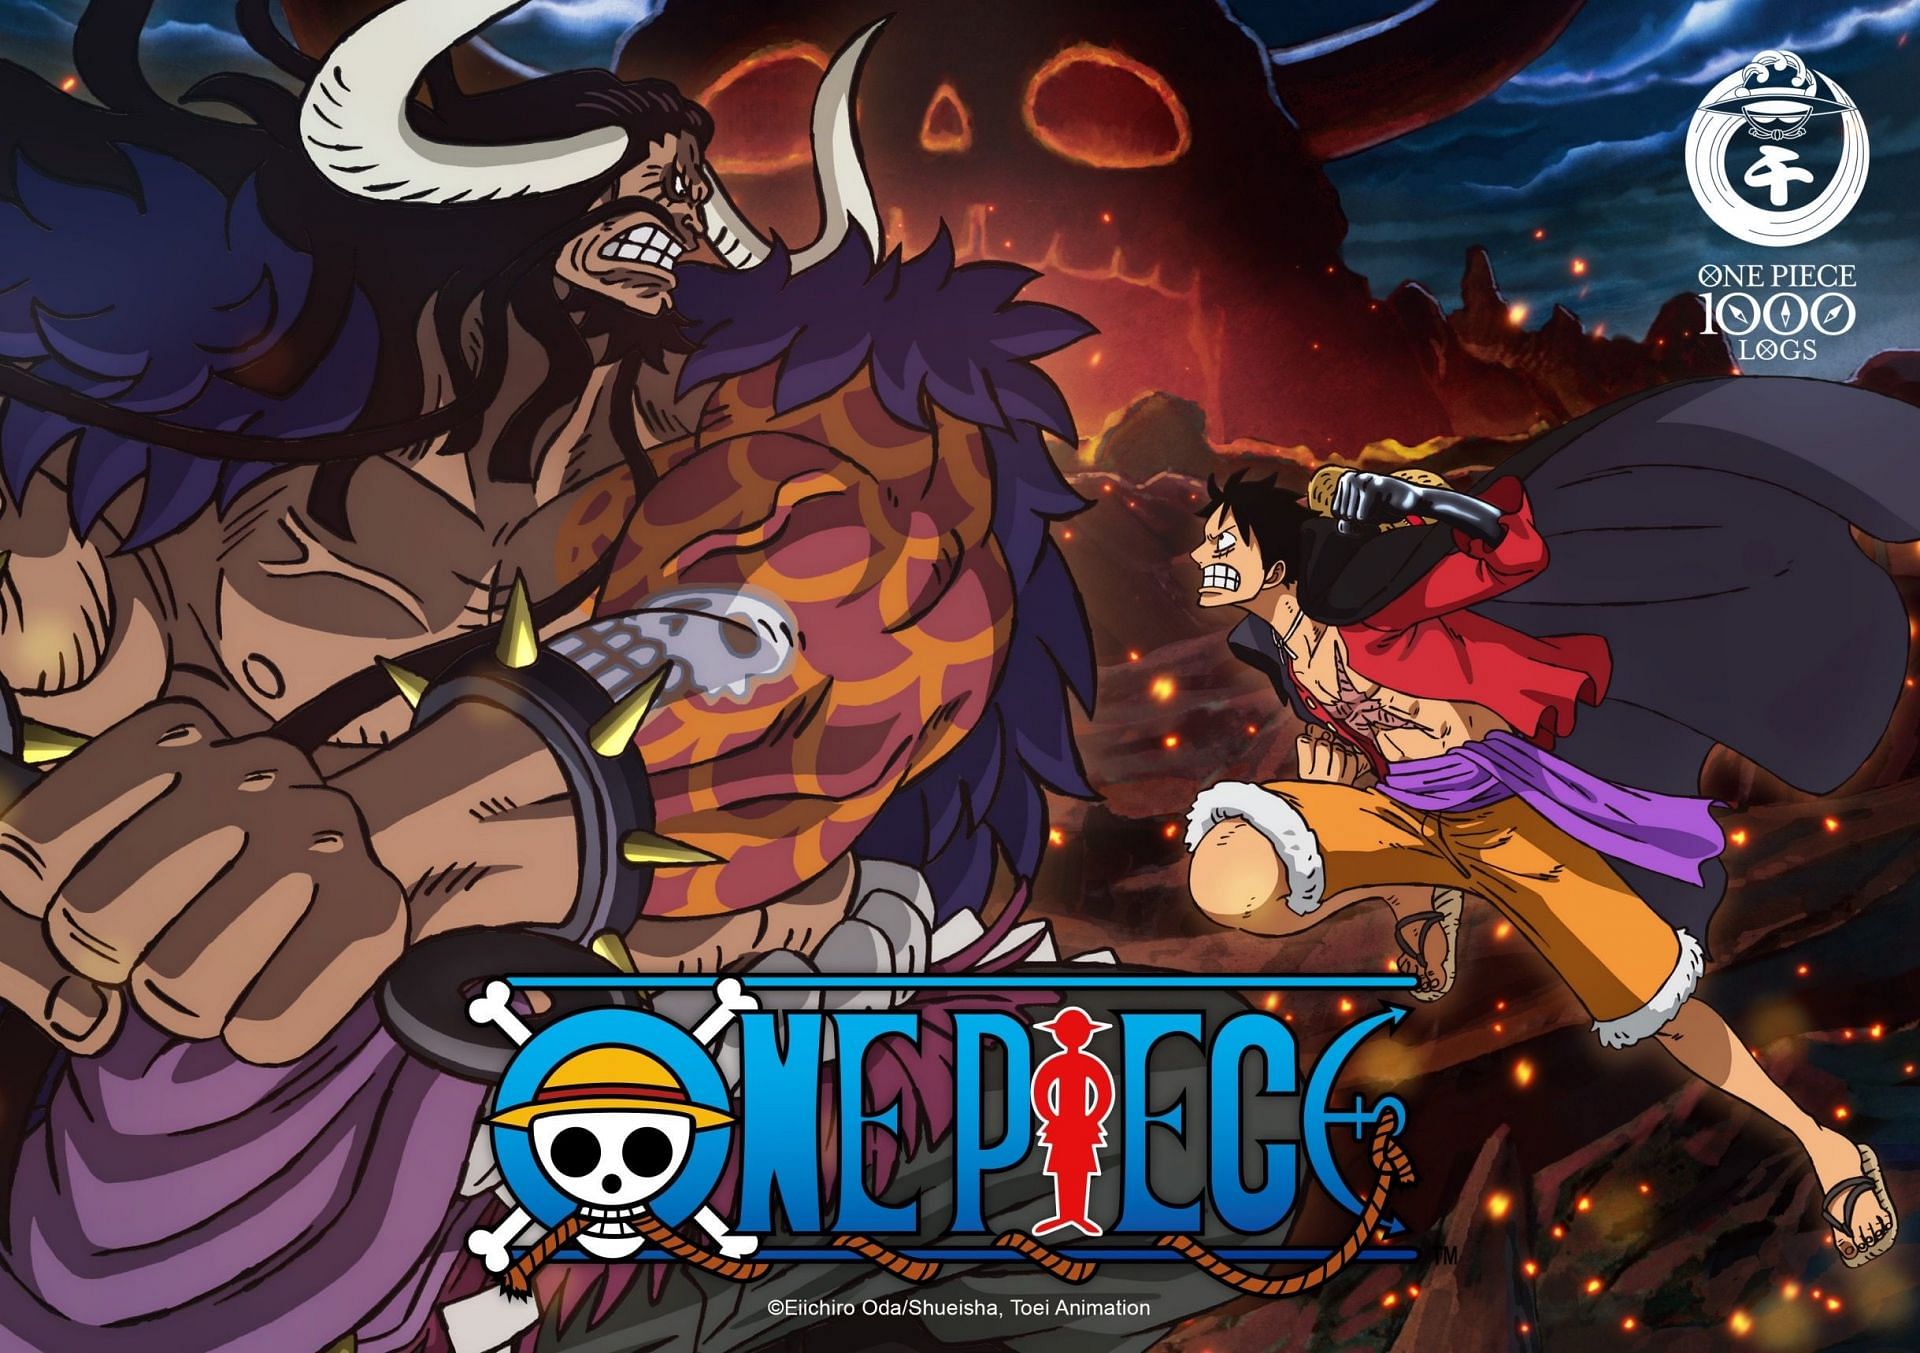 Toei Animation servers breached, delaying the release of future One Piece episodes (Image via Twitter/Crunchyroll)